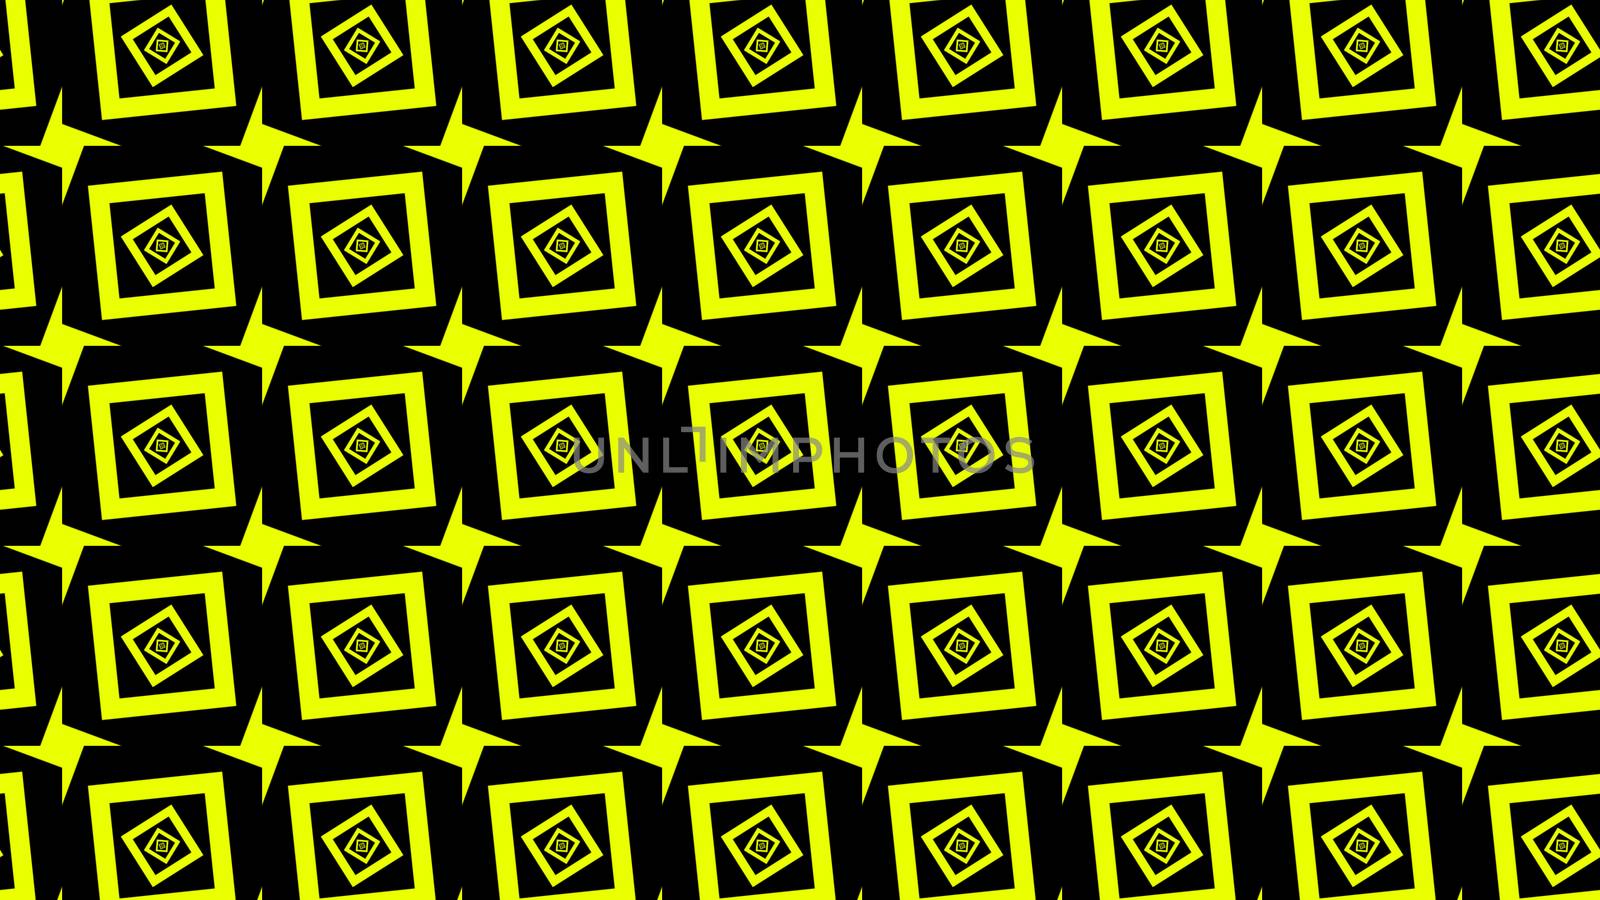 Wonderful 3d illustration of the rows of yellow squares with four-angle stars crating illusion. They look cheerful, fine and childish.